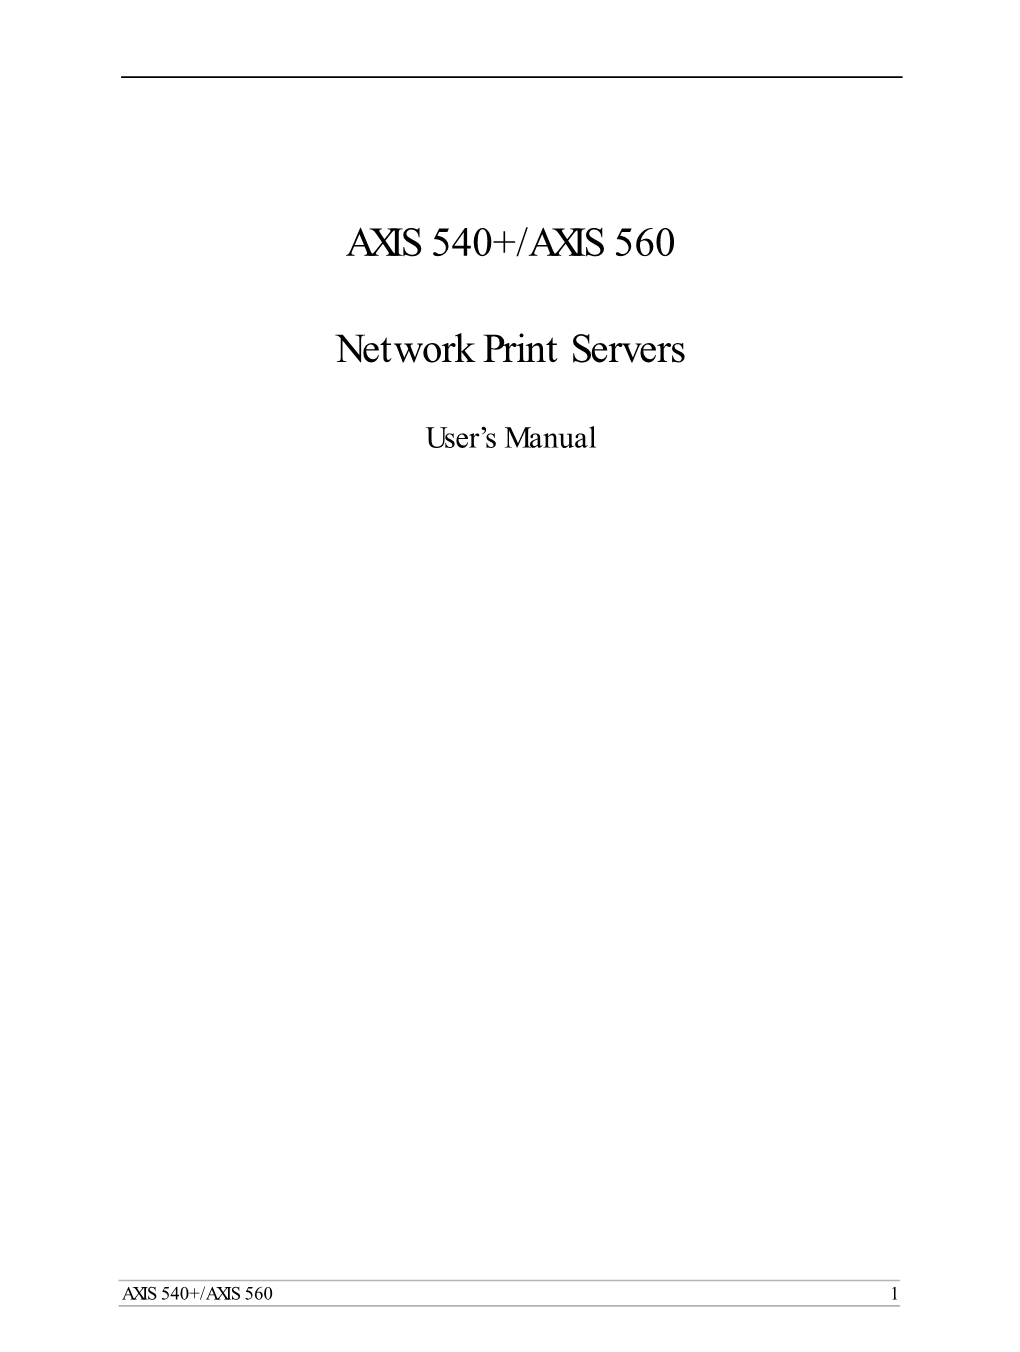 AXIS 540+/AXIS 560 Network Print Servers